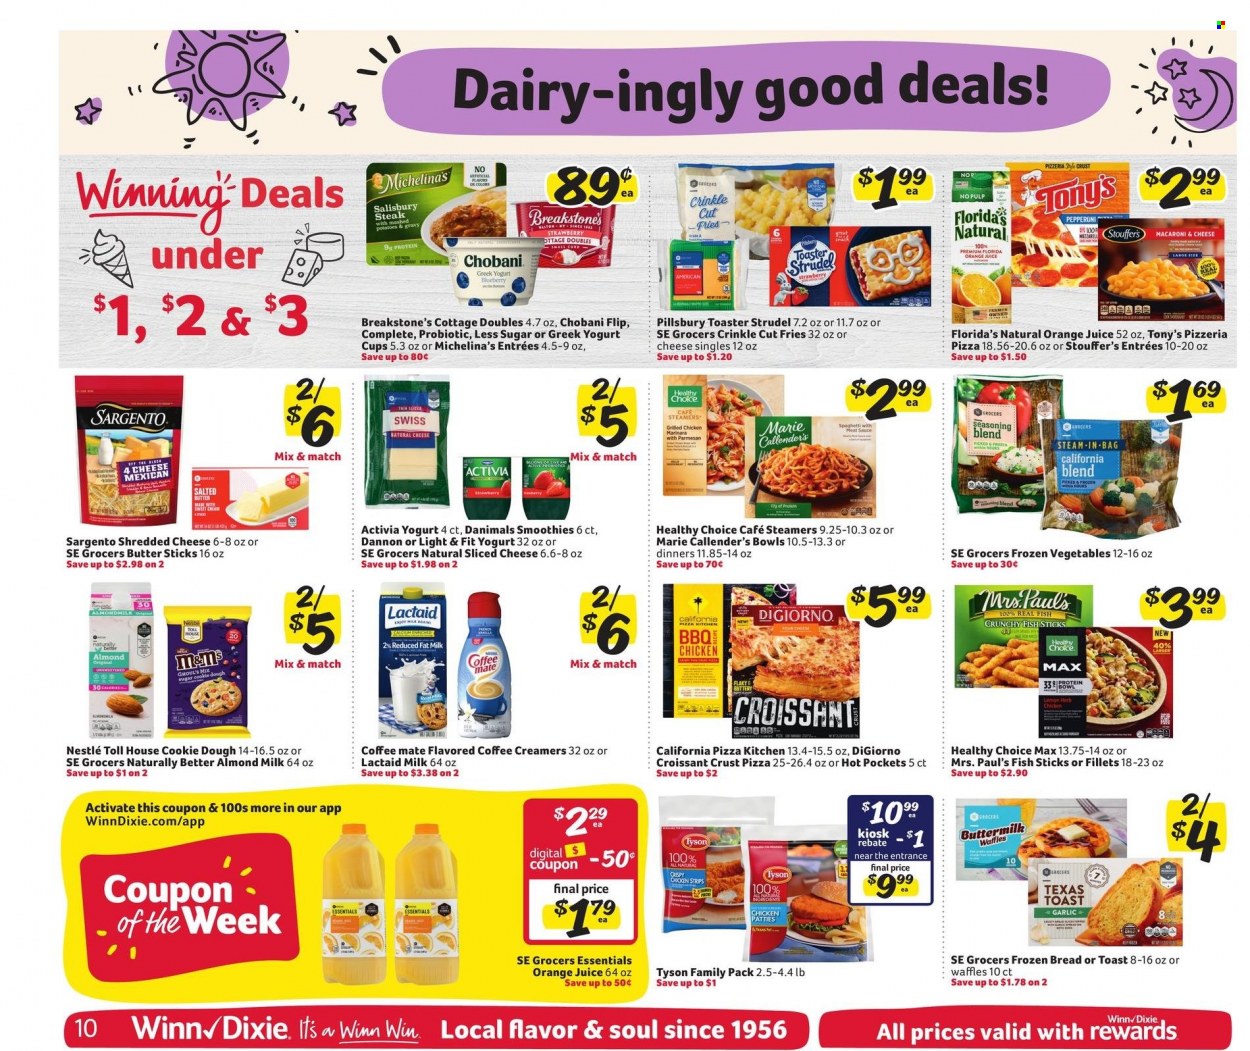 thumbnail - Winn Dixie Flyer - 10/20/2021 - 10/26/2021 - Sales products - bread, croissant, strudel, waffles, garlic, fish, fish fingers, fish sticks, macaroni & cheese, spaghetti, hot pocket, pizza, sauce, Pillsbury, Healthy Choice, Marie Callender's, pepperoni, Lactaid, shredded cheese, sliced cheese, Sargento, greek yoghurt, yoghurt, Activia, Chobani, Dannon, Danimals, almond milk, buttermilk, Coffee-Mate, salted butter, frozen vegetables, strips, chicken strips, chicken patties, Stouffer's, potato fries, cookie dough, Nestlé, Florida's Natural, spice, orange juice, juice, smoothie, bowl. Page 13.